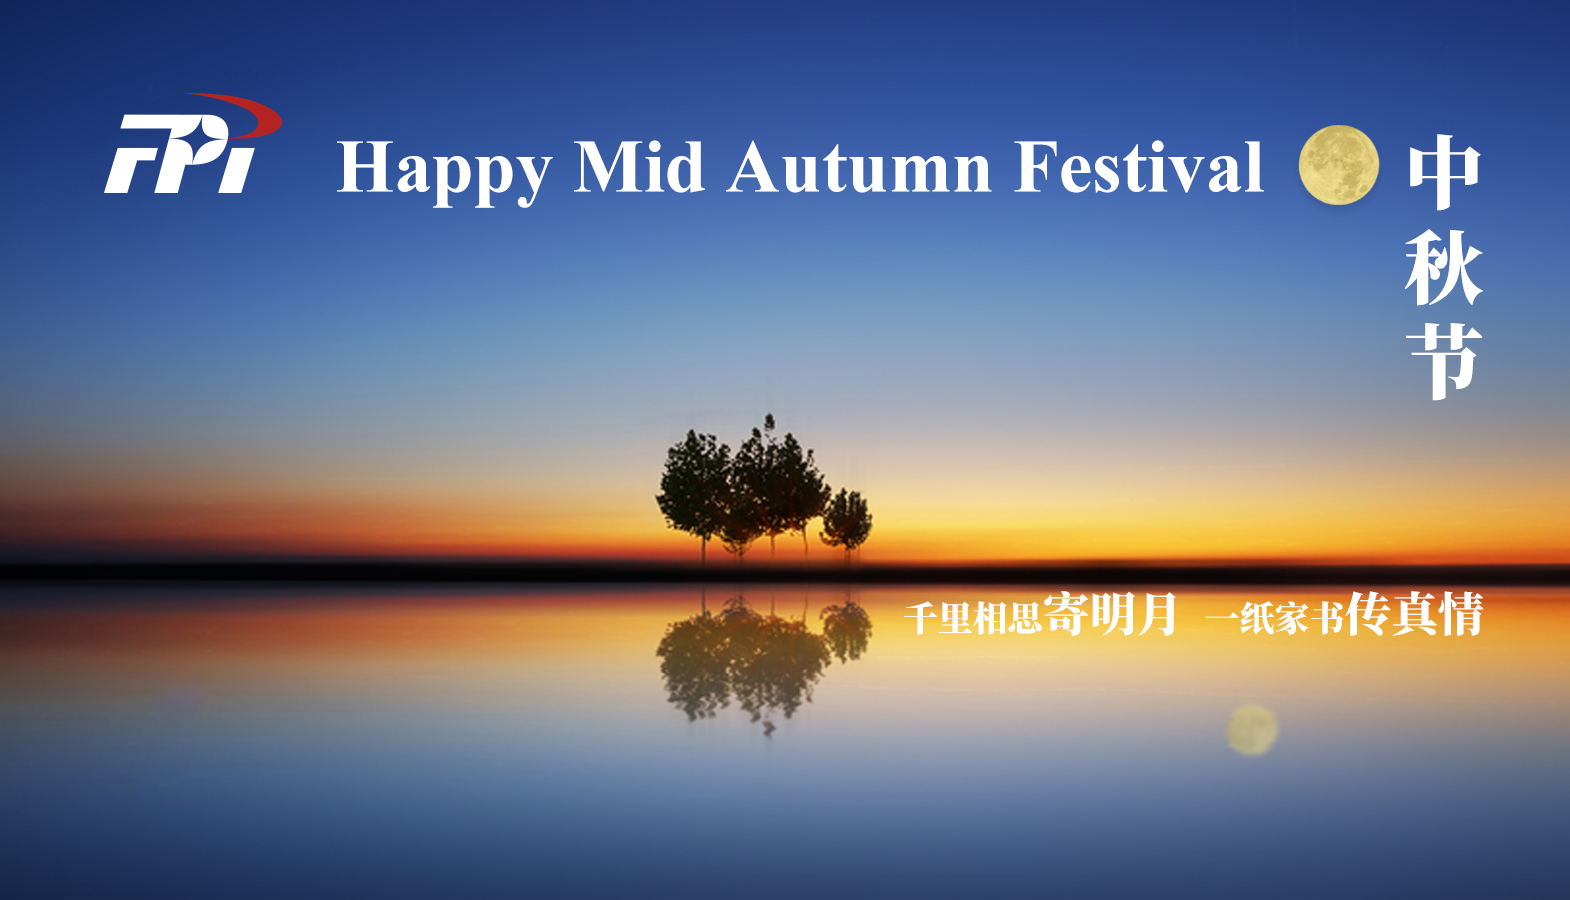 FPI Wishes You a Happy Mid-Autumn Festival!